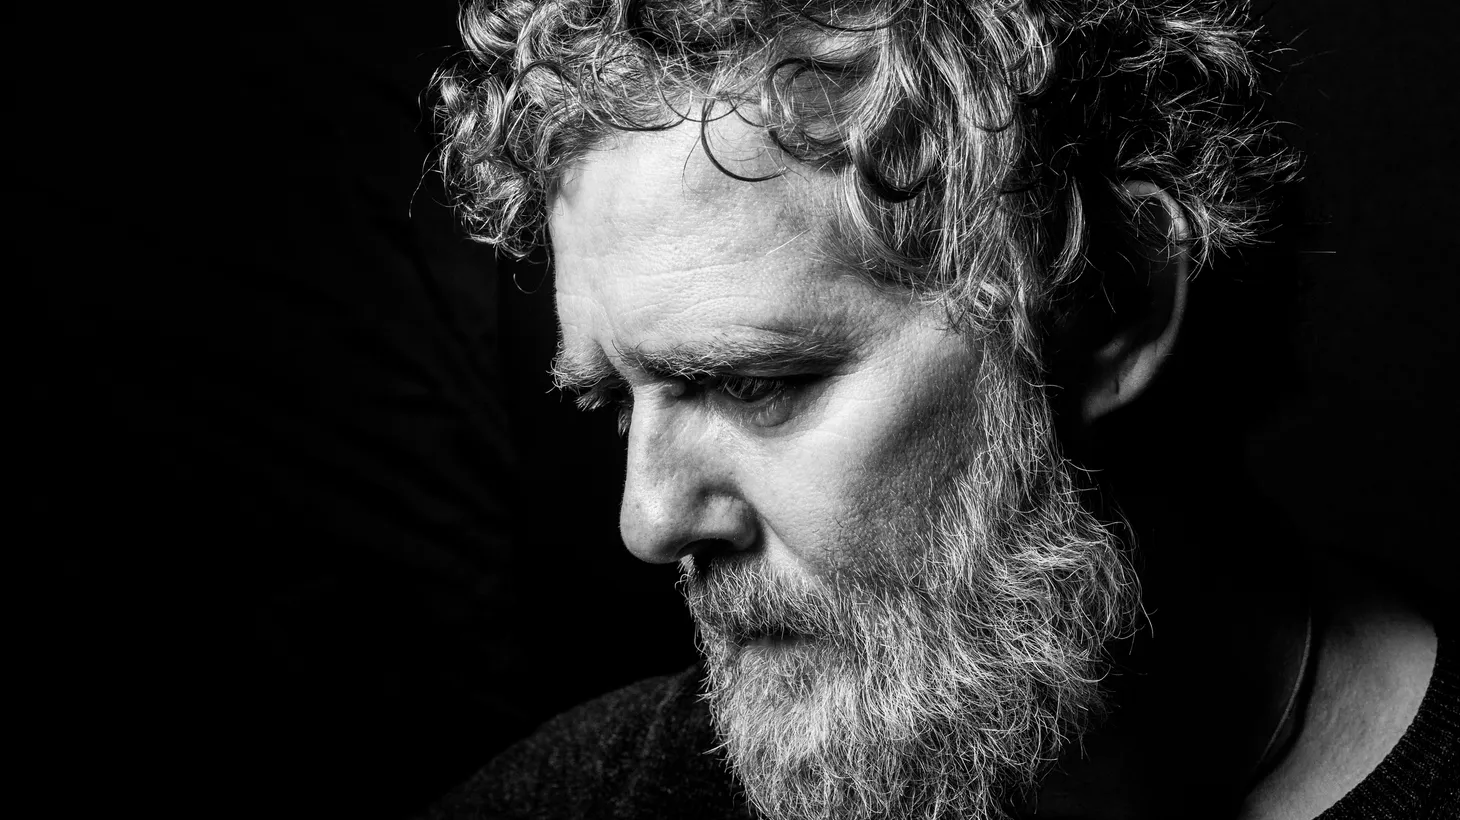 The plight of the Ukrainian people cuts deep for Glen Hansard, so he did what he does best and poured his heart out in a song.